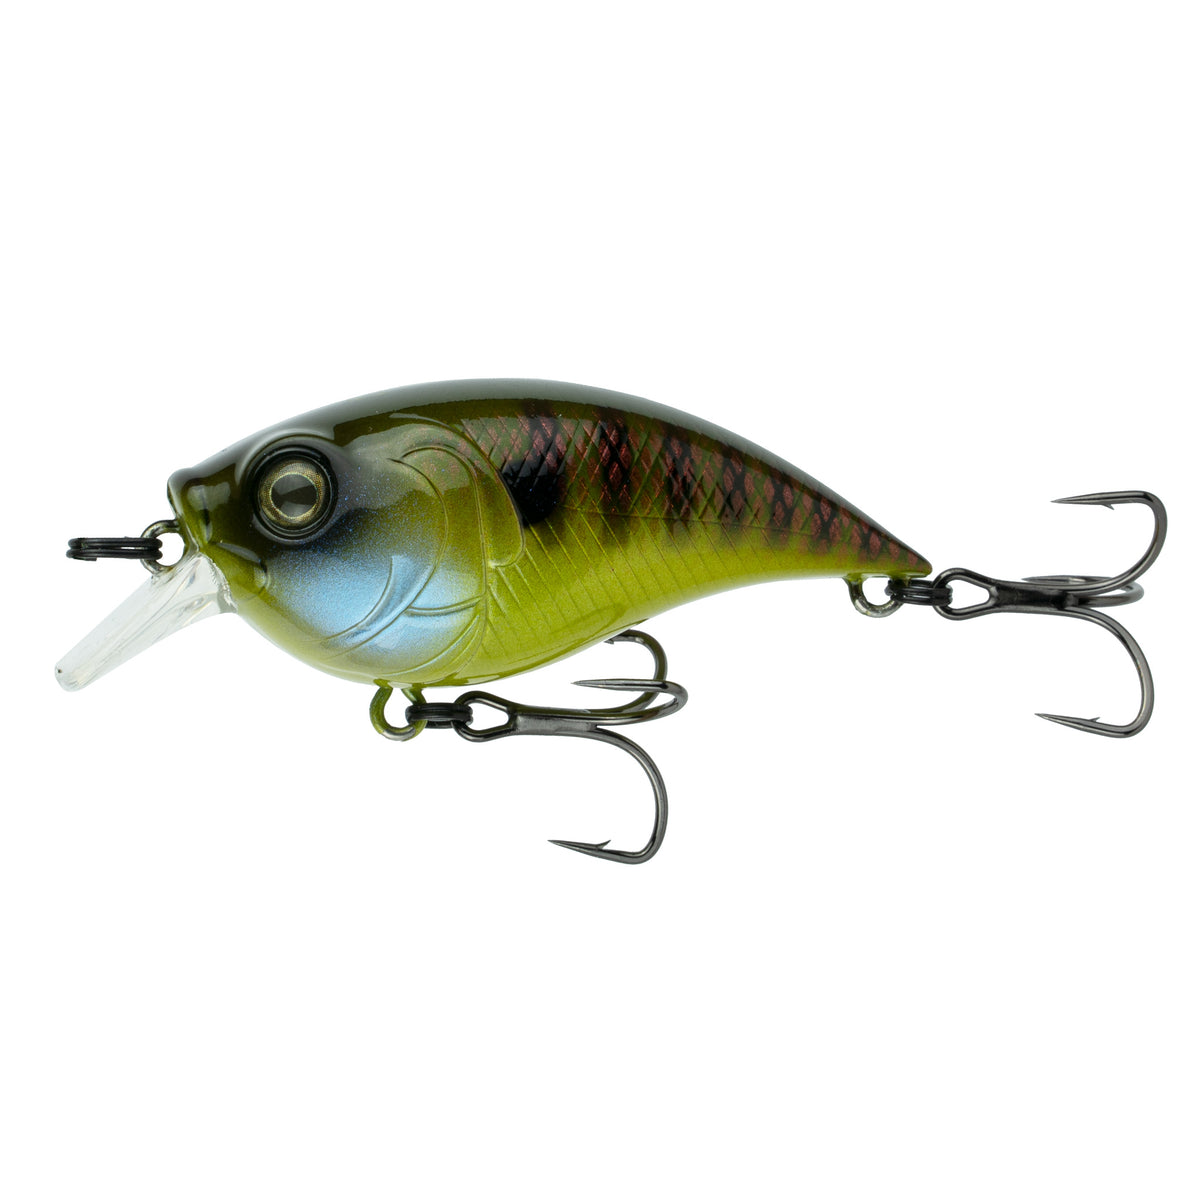 Classical style 6th Sense Fishing Deals Curve Finesse Squarebill - Crawfish  Nook - from 6th Sense Fishing Sales Store